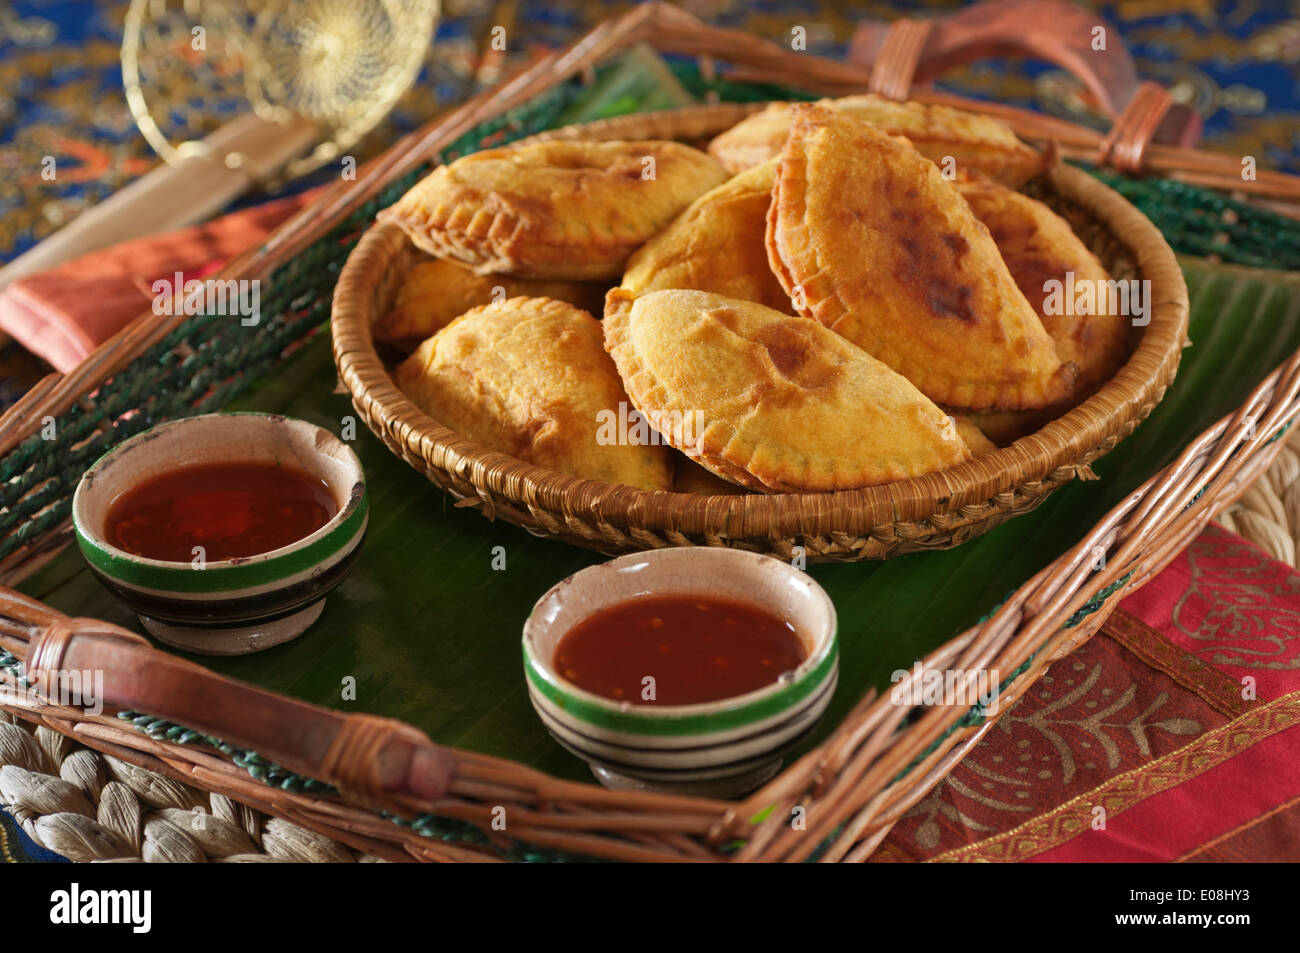 Curry puffs. South East Asia Street food Stock Photo